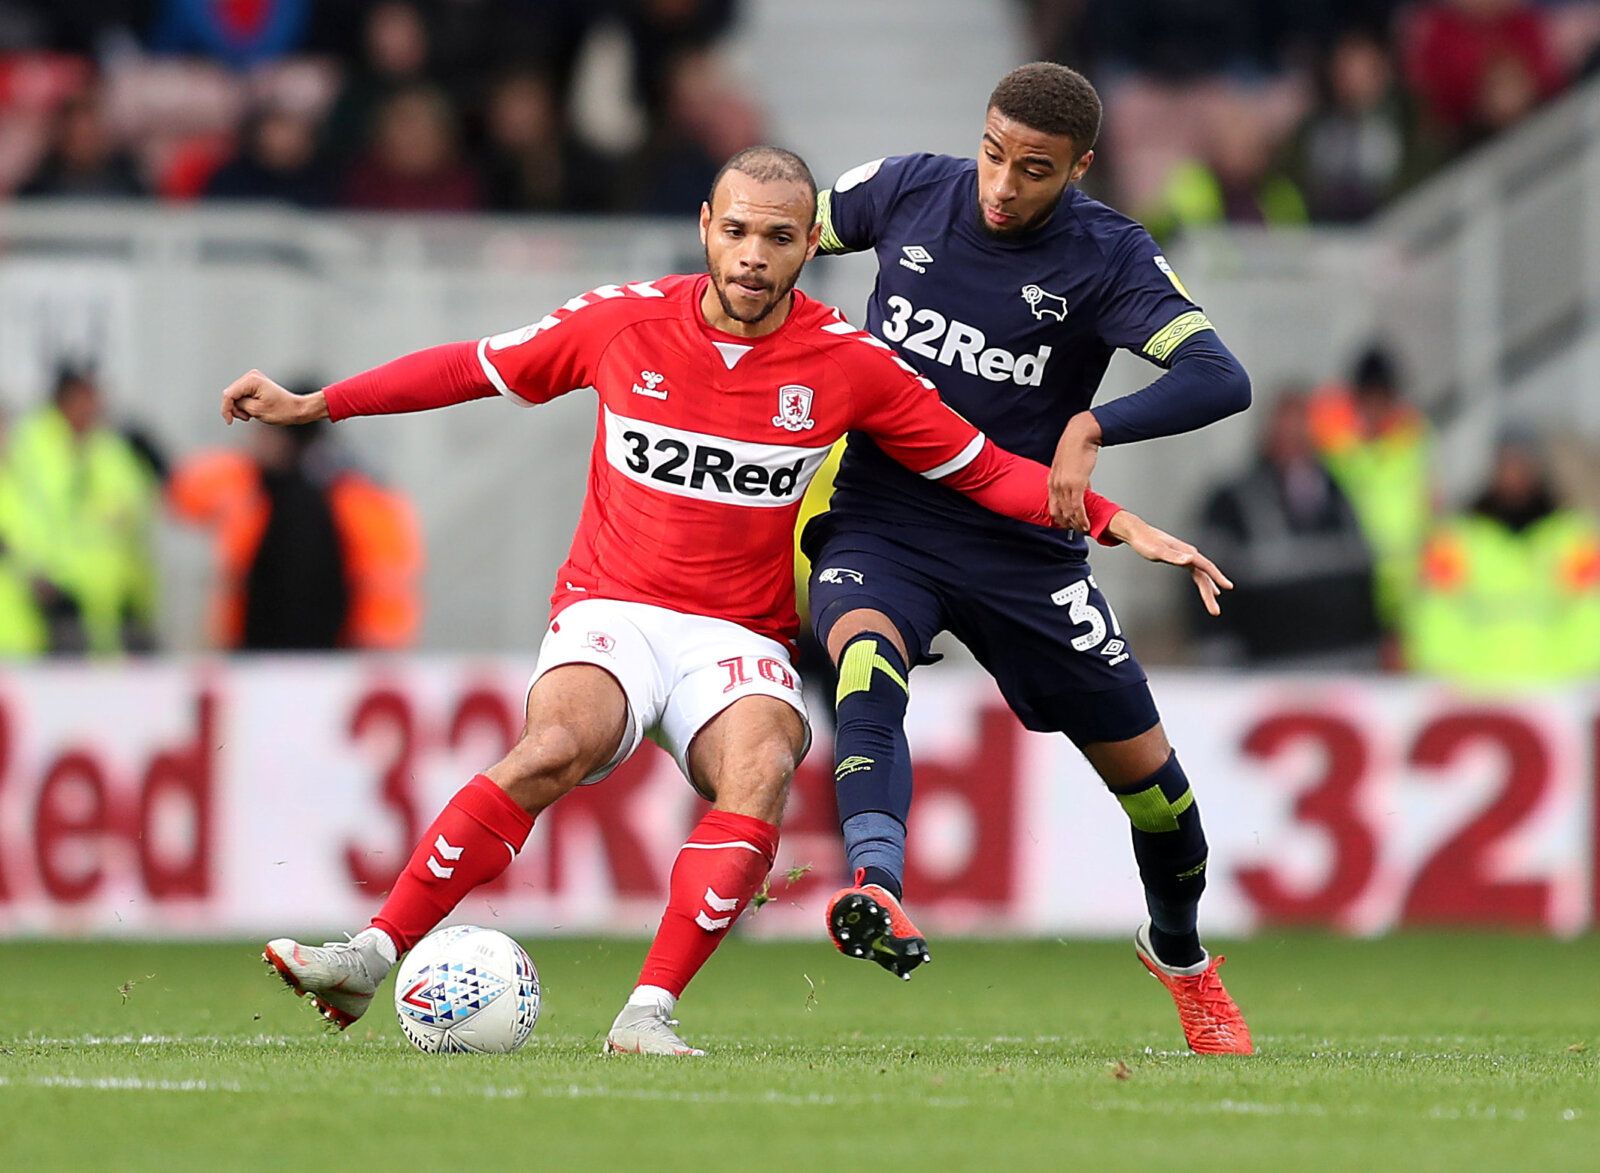 Soccer Football - Championship - Middlesbrough v Derby County - Riverside Stadium, Middlesbrough, Britain - October 27, 2018   Middlesbrough's Martin Braithwaite in action with Derby County's Jayden Bogle   Action Images/John Clifton    EDITORIAL USE ONLY. No use with unauthorized audio, video, data, fixture lists, club/league logos or 